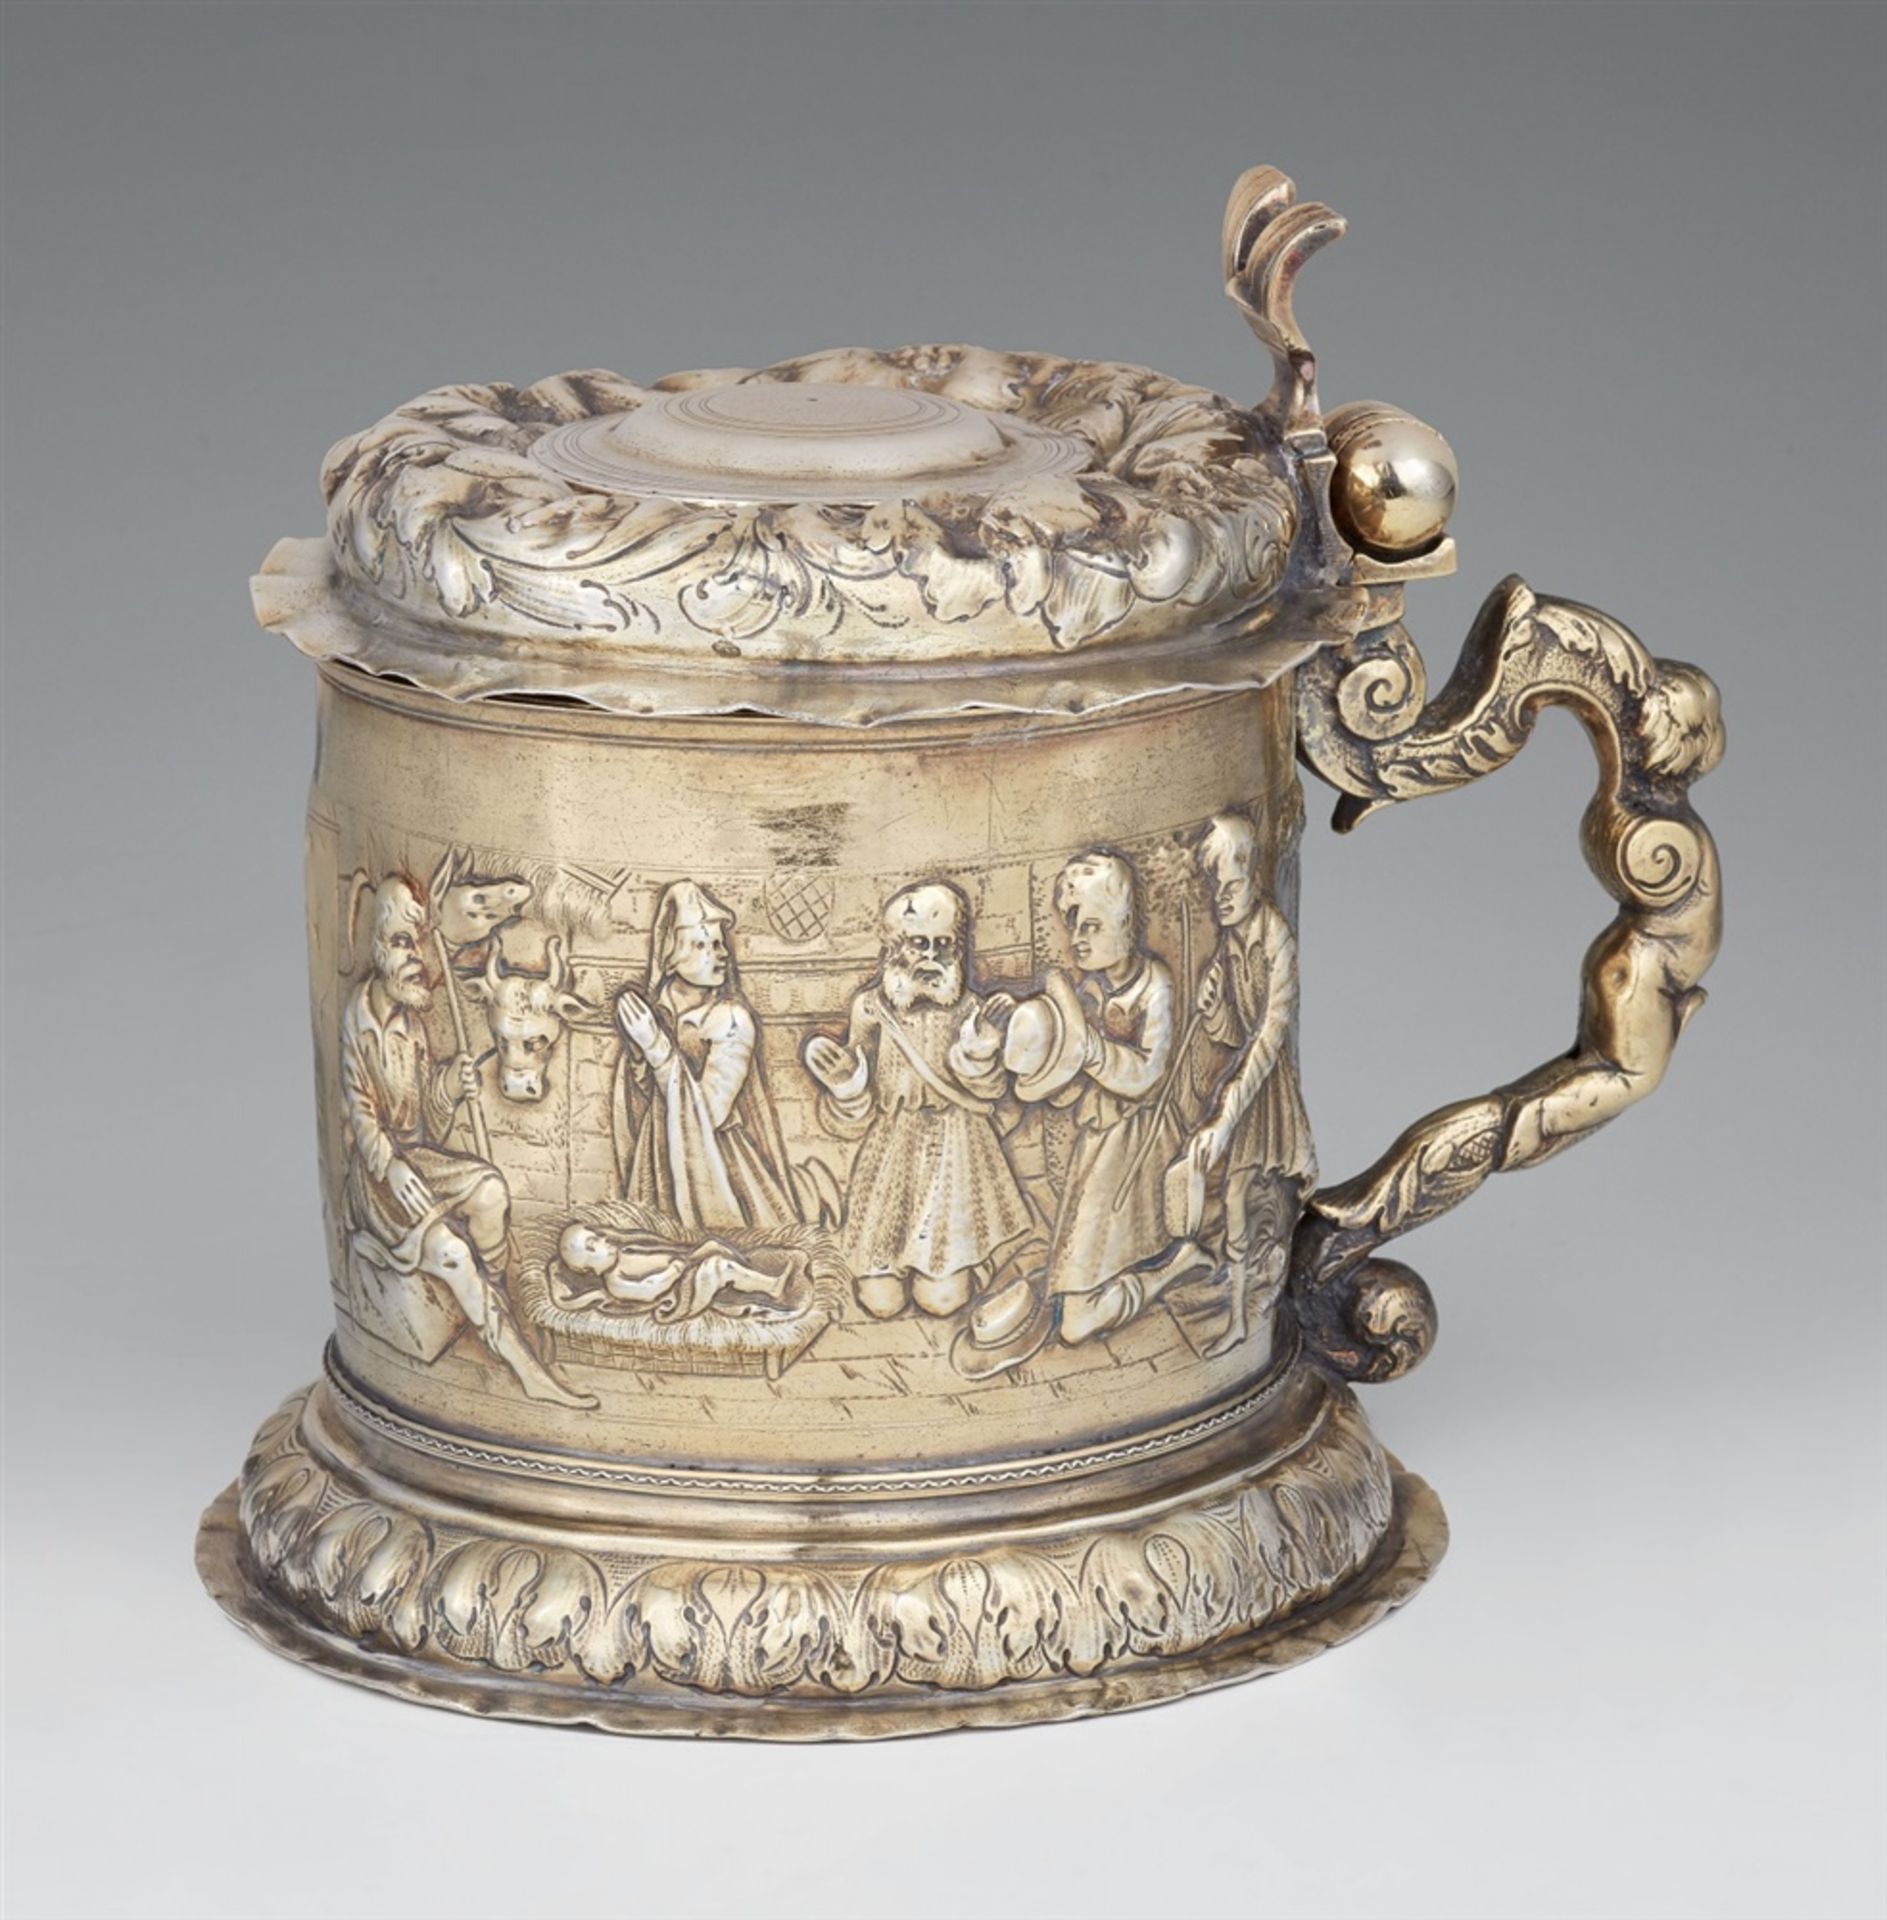 A rare Halle silver tankardSilver; with remains of gilding. Silver tankard with remnants of former